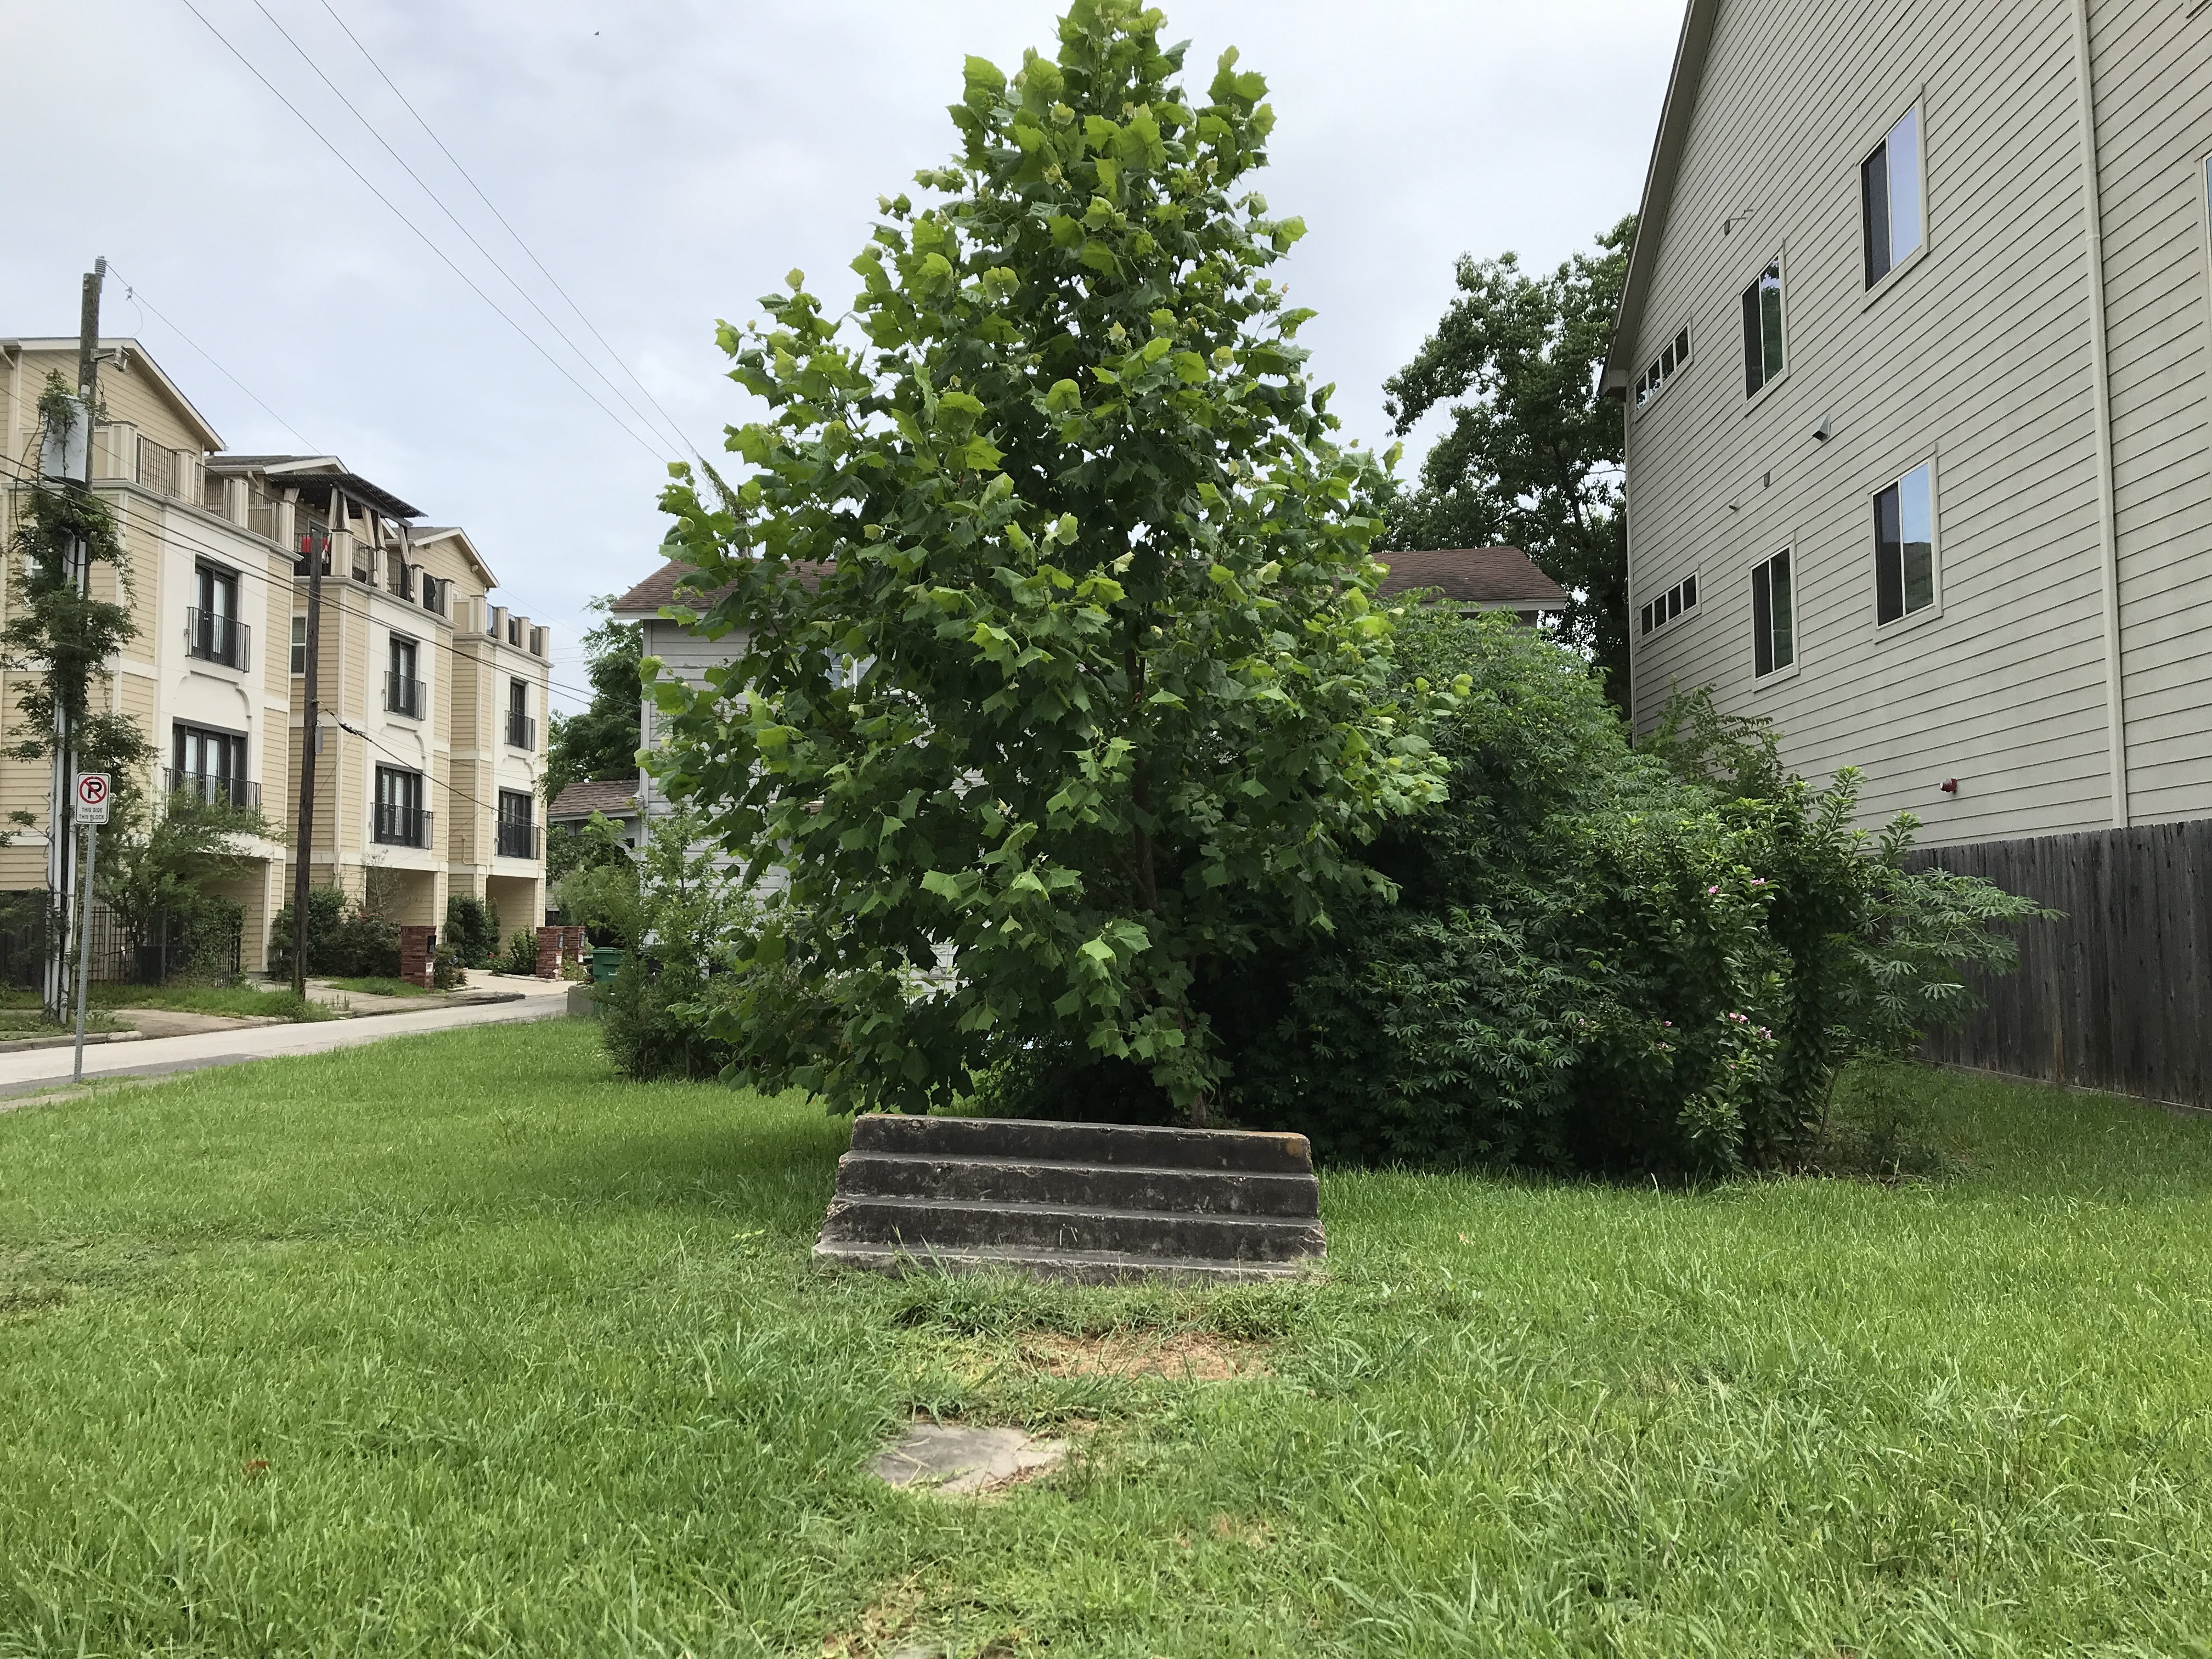 Freedmen's Town - a tree in front of a solitary doorstep